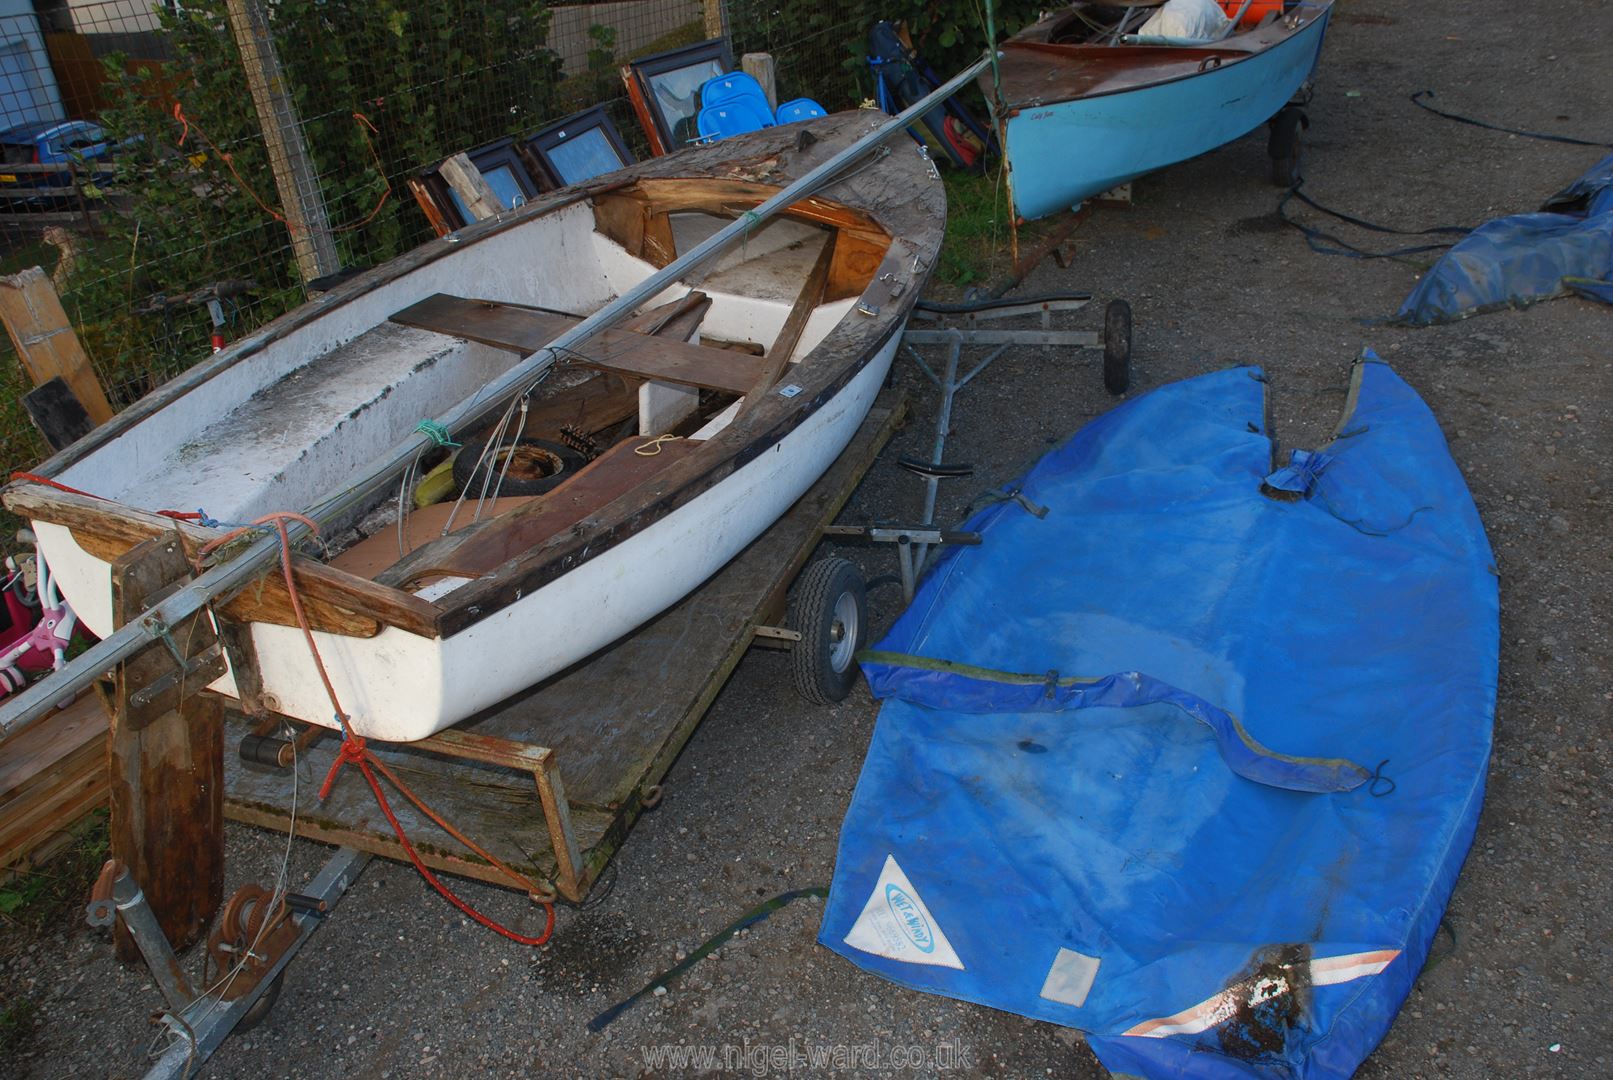 A glass fibre hulled sailing dinghy for restoration with 17' 2" high aluminium mast, fittings, - Image 5 of 14